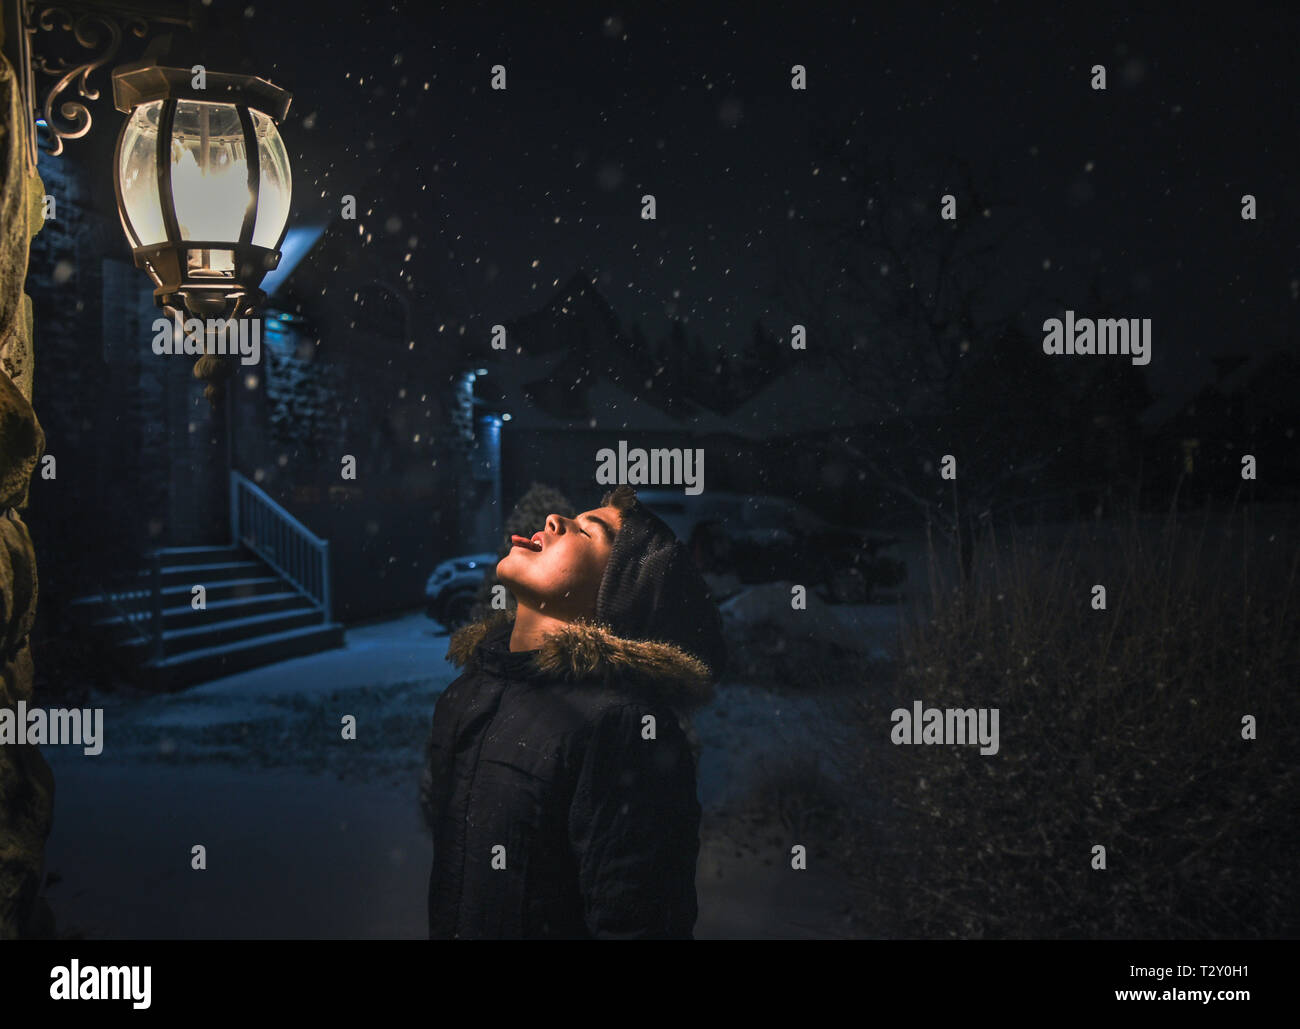 Boy catching snowflakes on his tongue beside a light on a snowy night Stock Photo